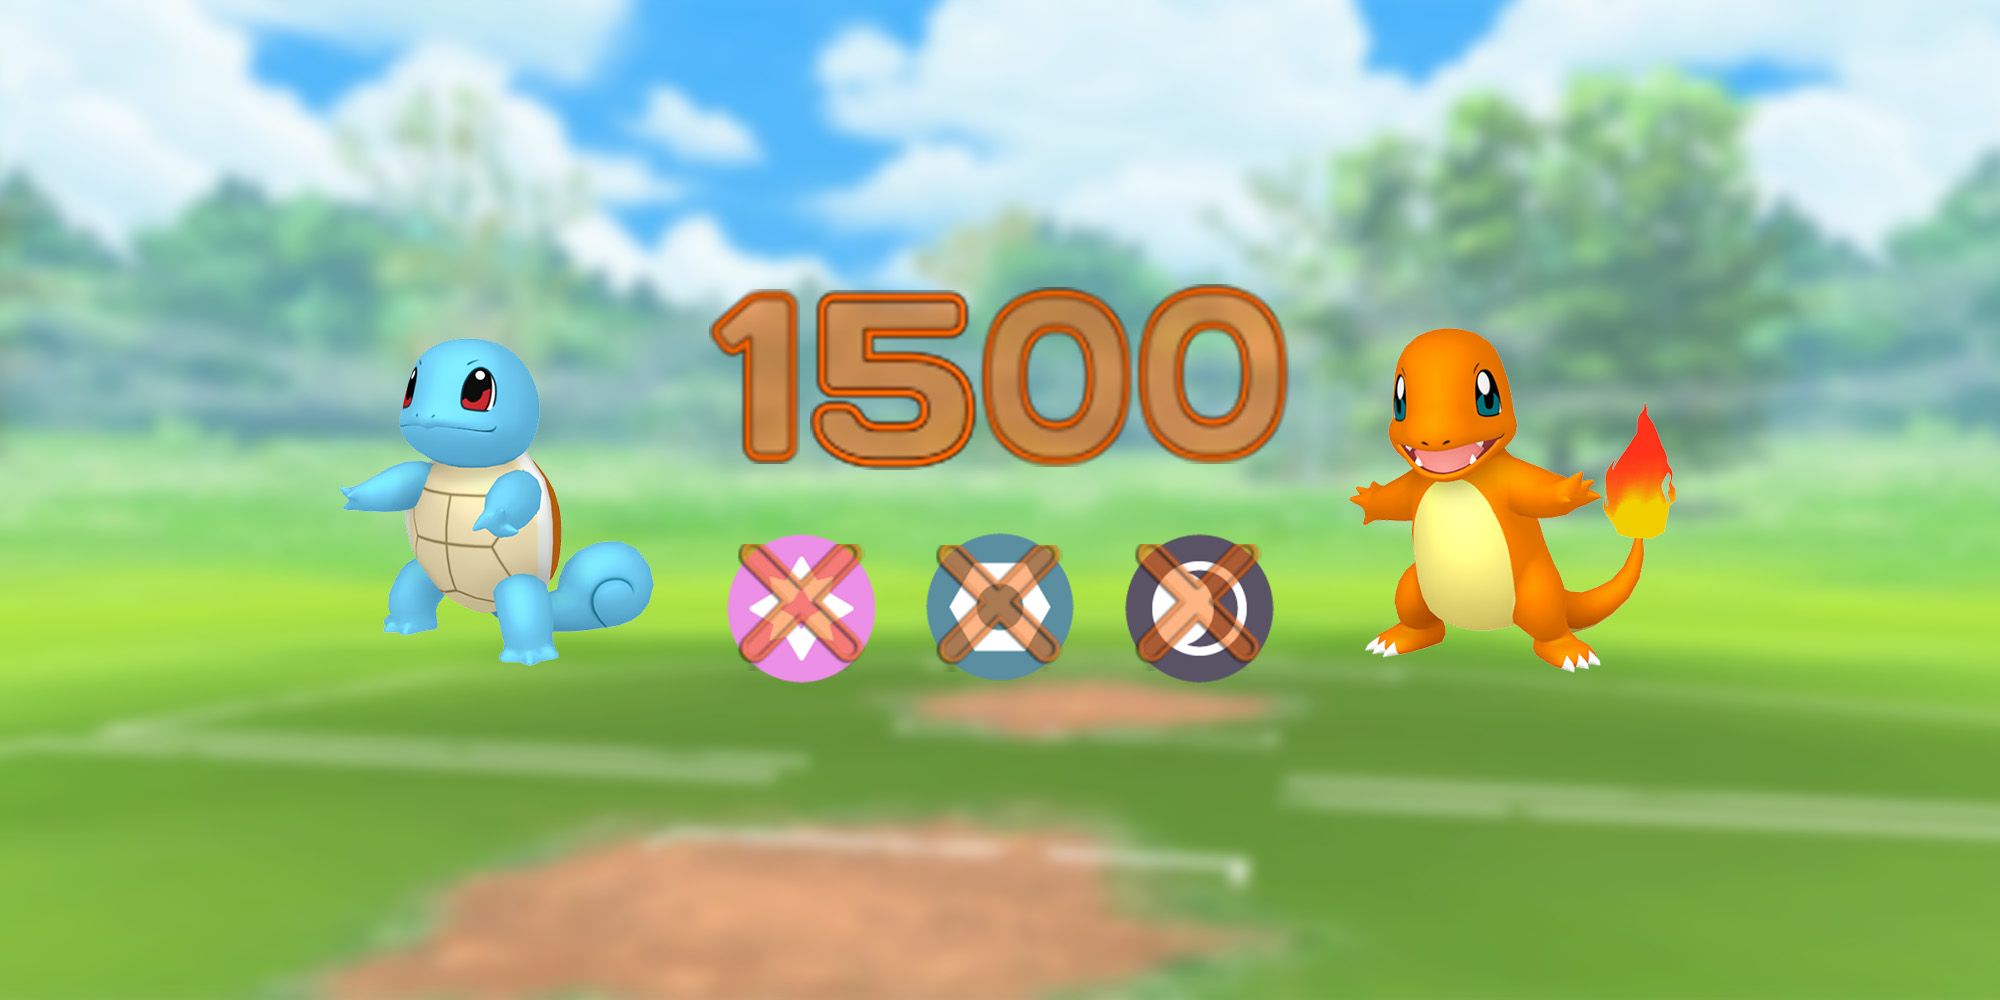 Pokemon Go Kanto Cup Restrictions - Charmander, Squirtle, 1,500 CP